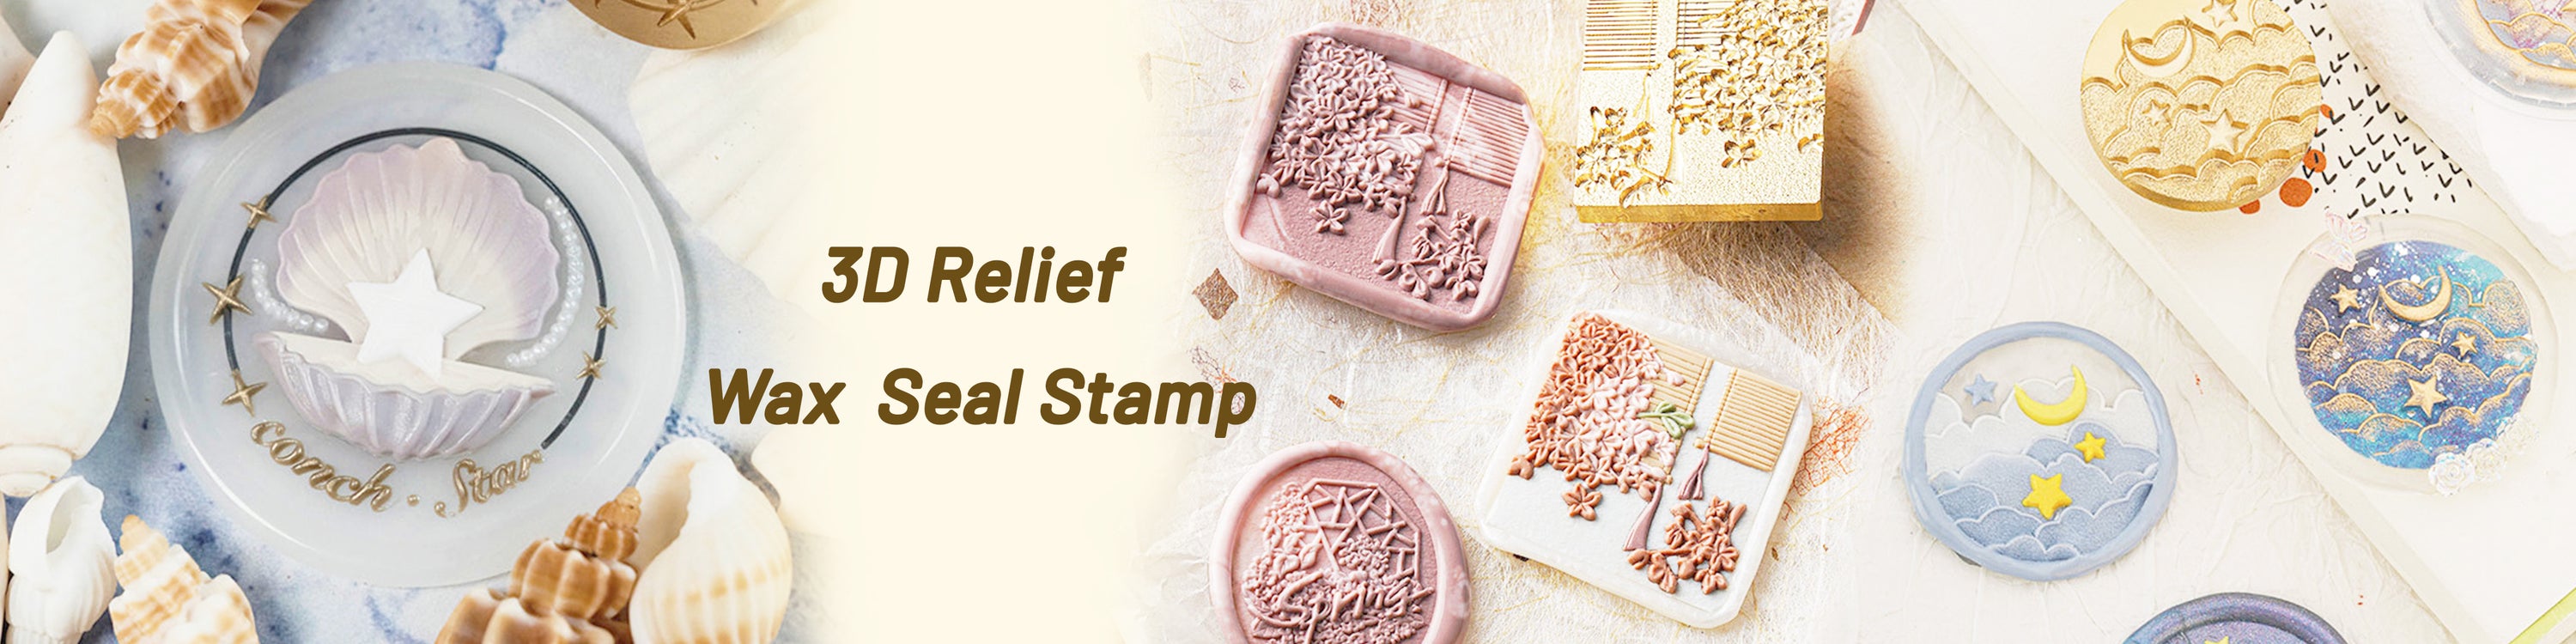 3D Relief Wax Seal Stamp - Wedding & Rose & Plant & Animal & Haoliday & Pop Culture - Stamprints